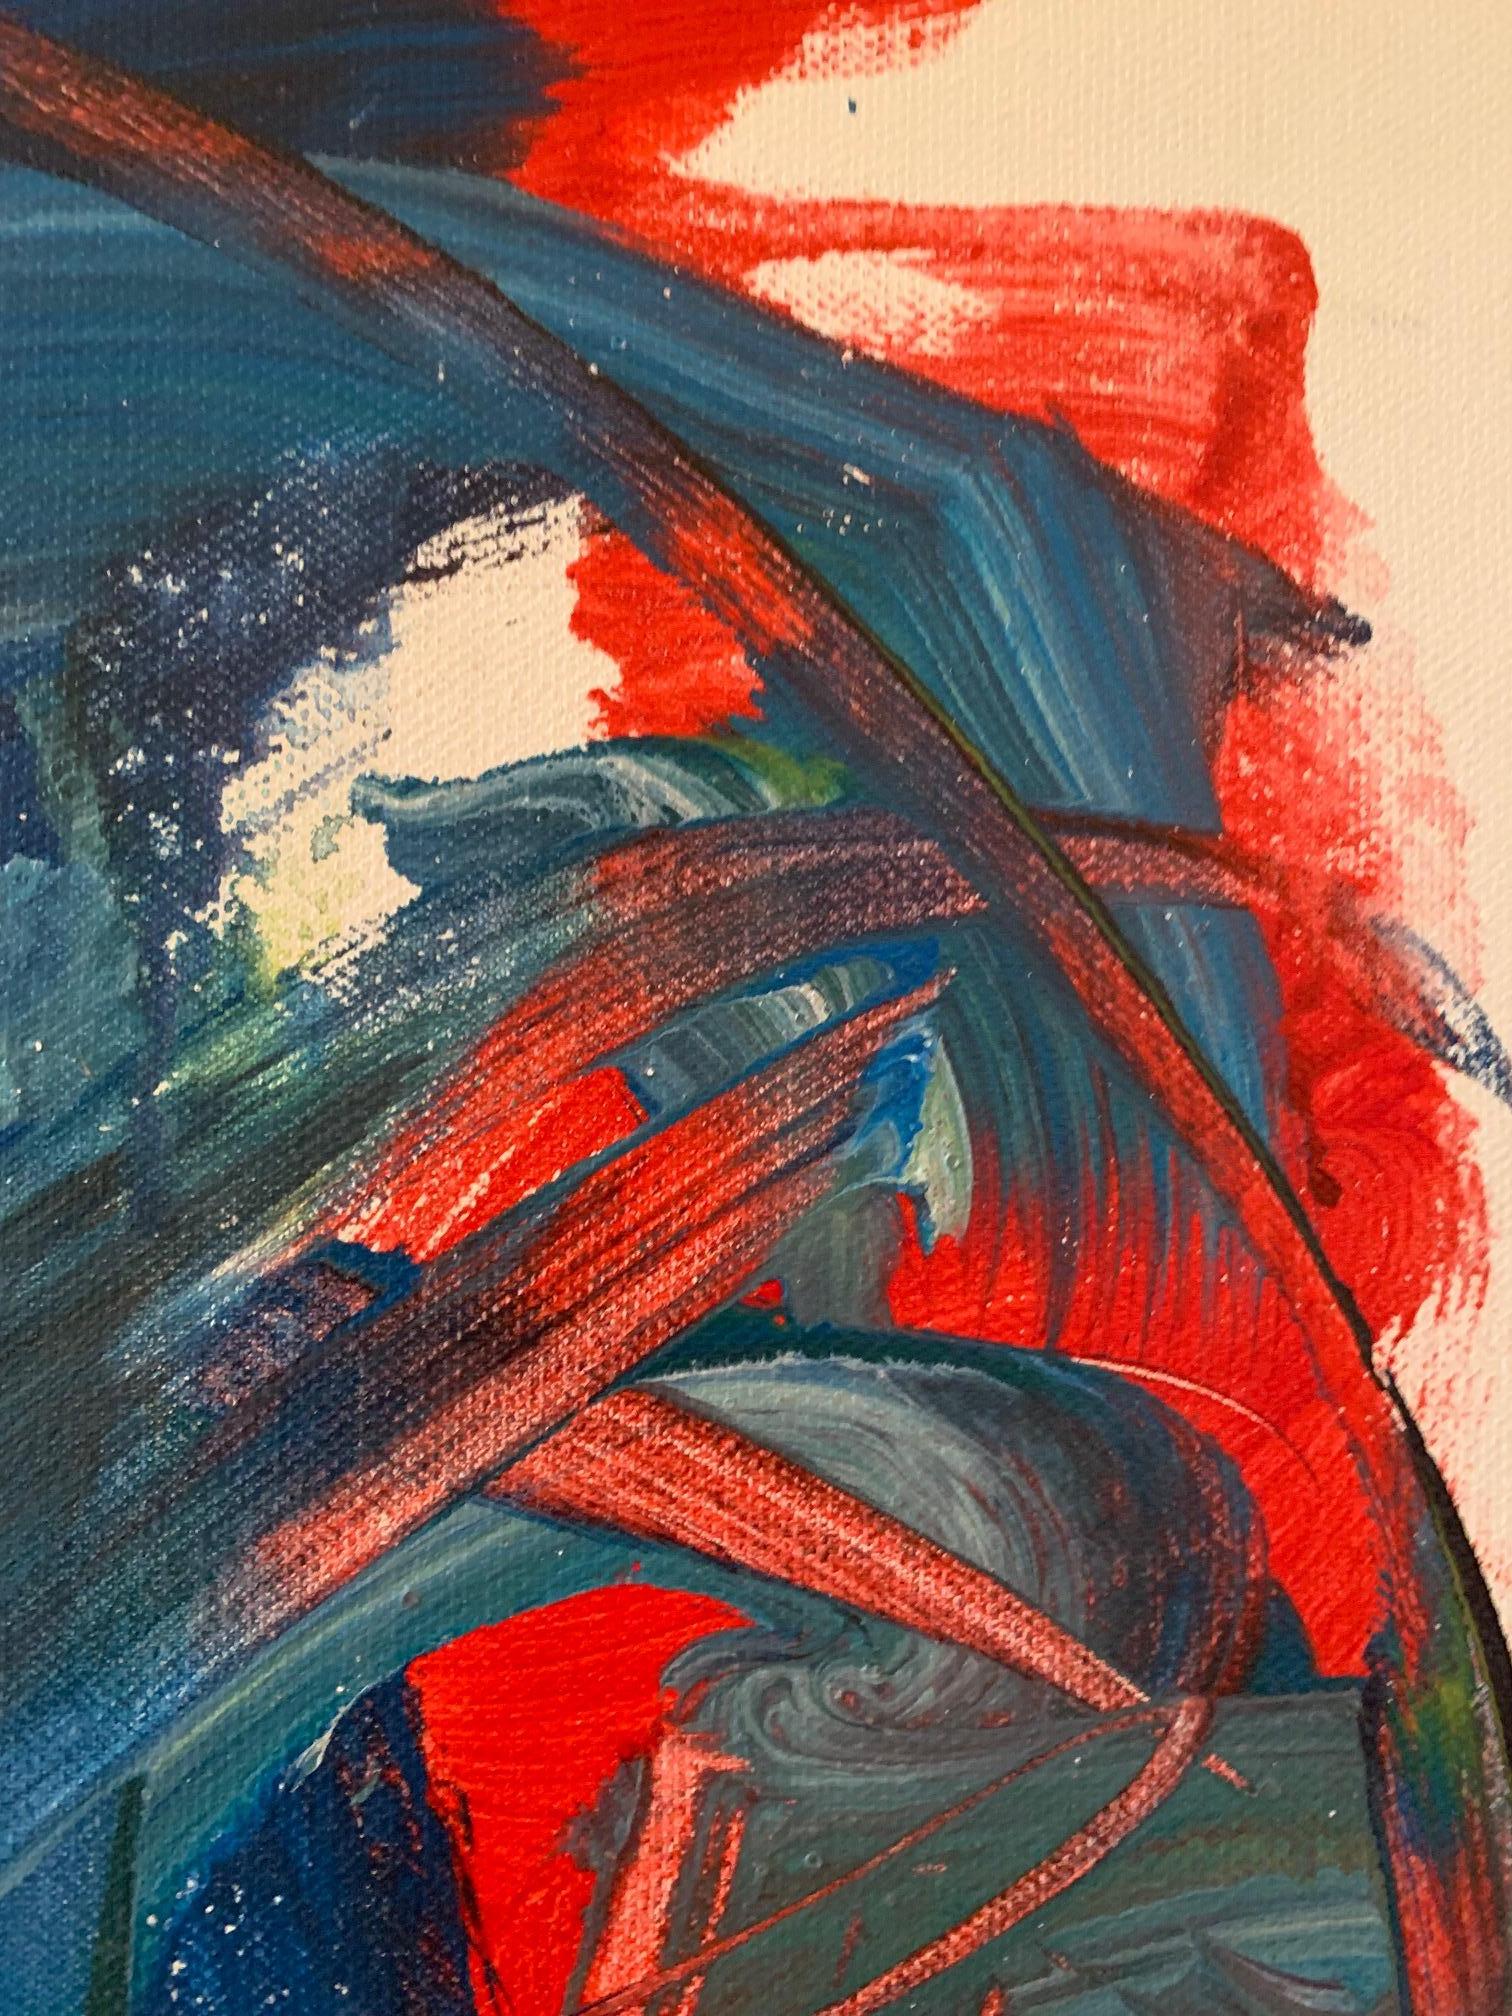 'Blue Red Yellow' Oil On Canvas  Contemporary, Colorful , Abstract by Masri - Painting by Masri Hayssam